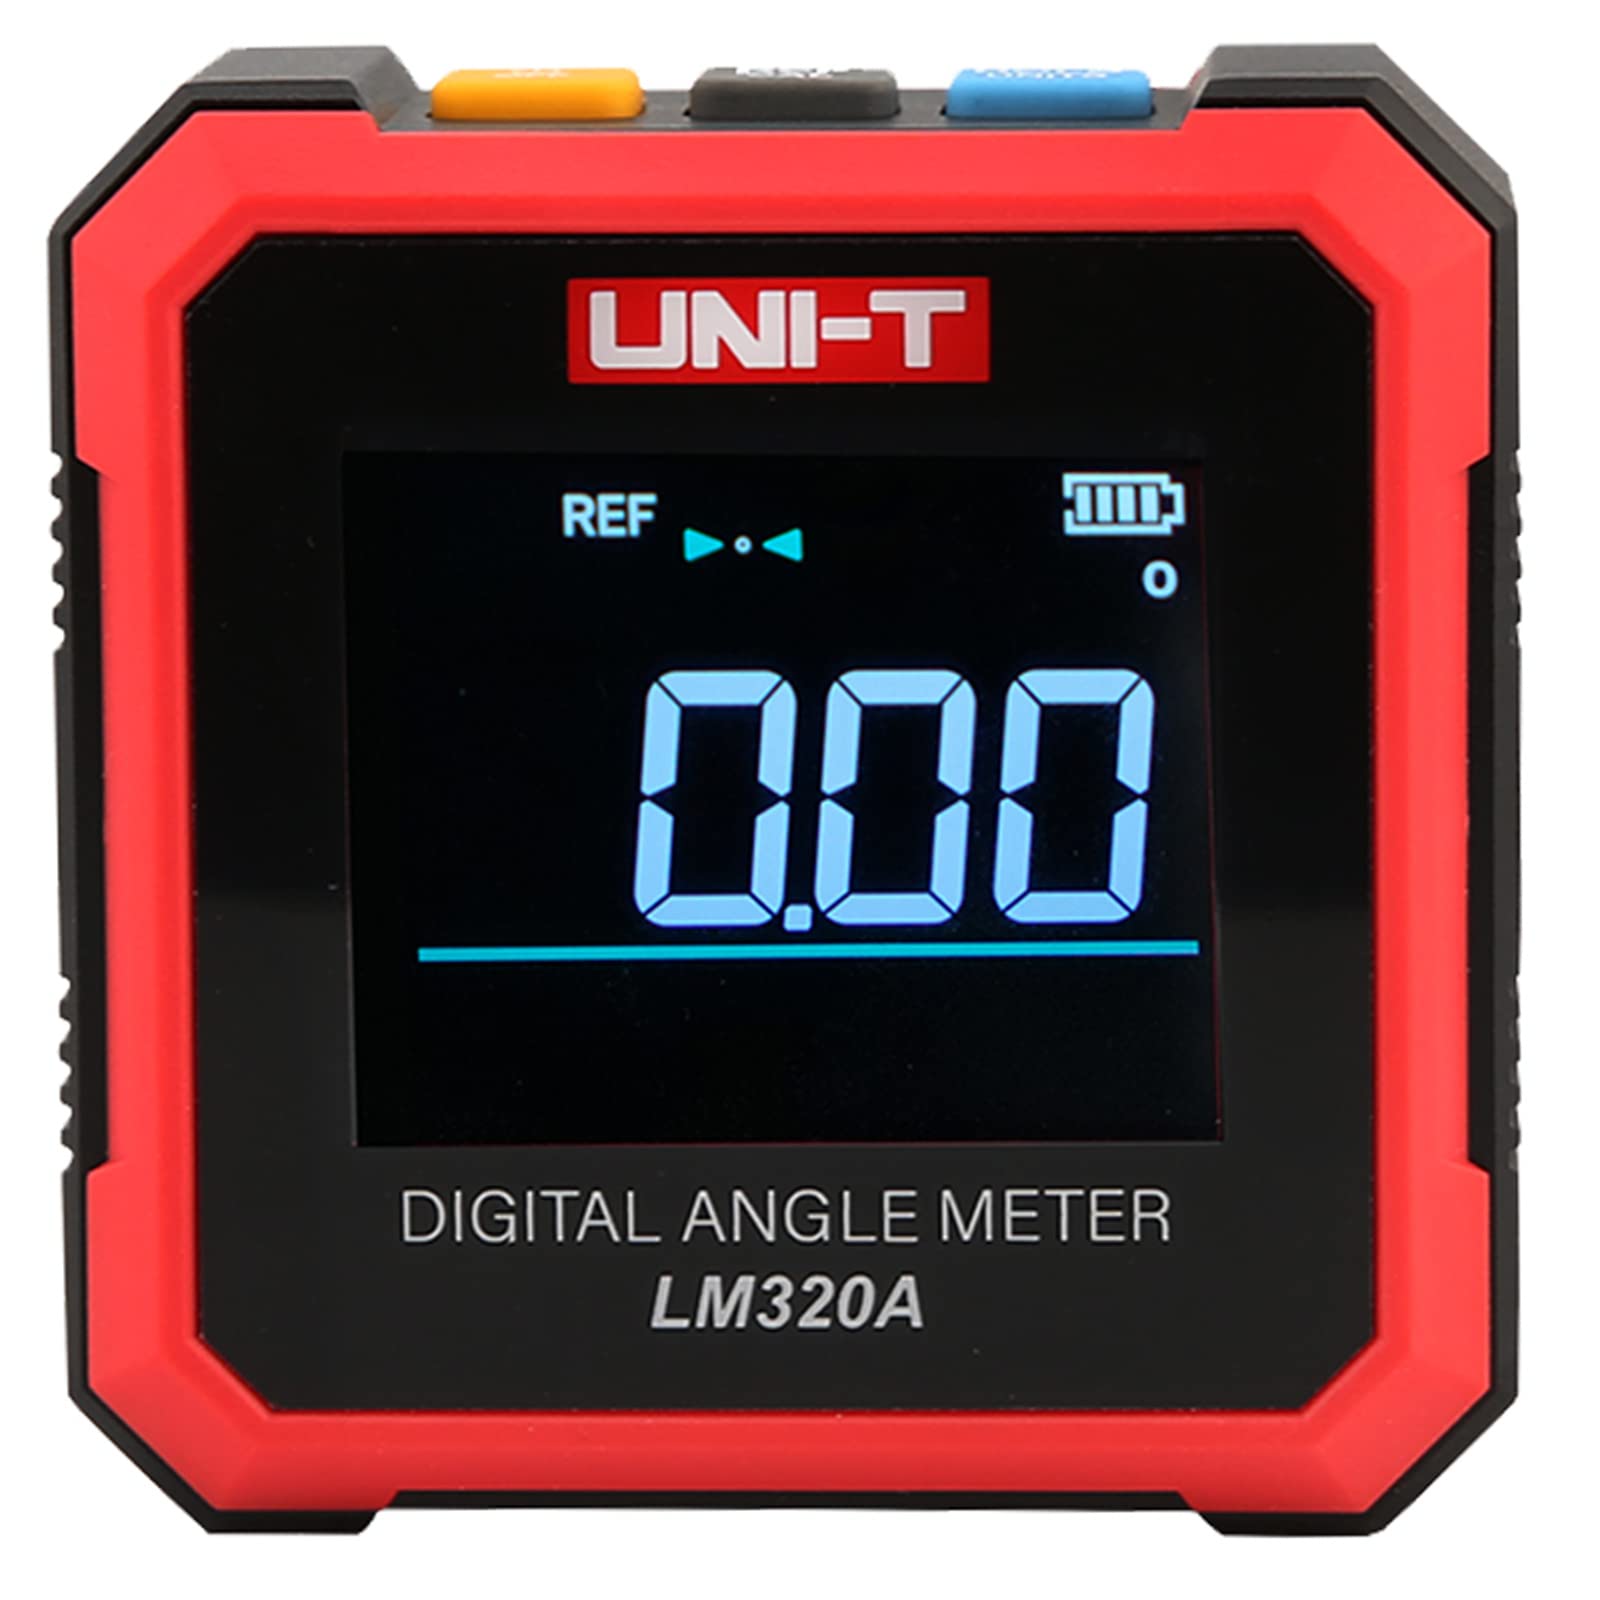 UNI-T LM320A Electronic Angle Meter Digital Protractor Magnetic Inclinometer Angle Tester Bevel Box Backlight